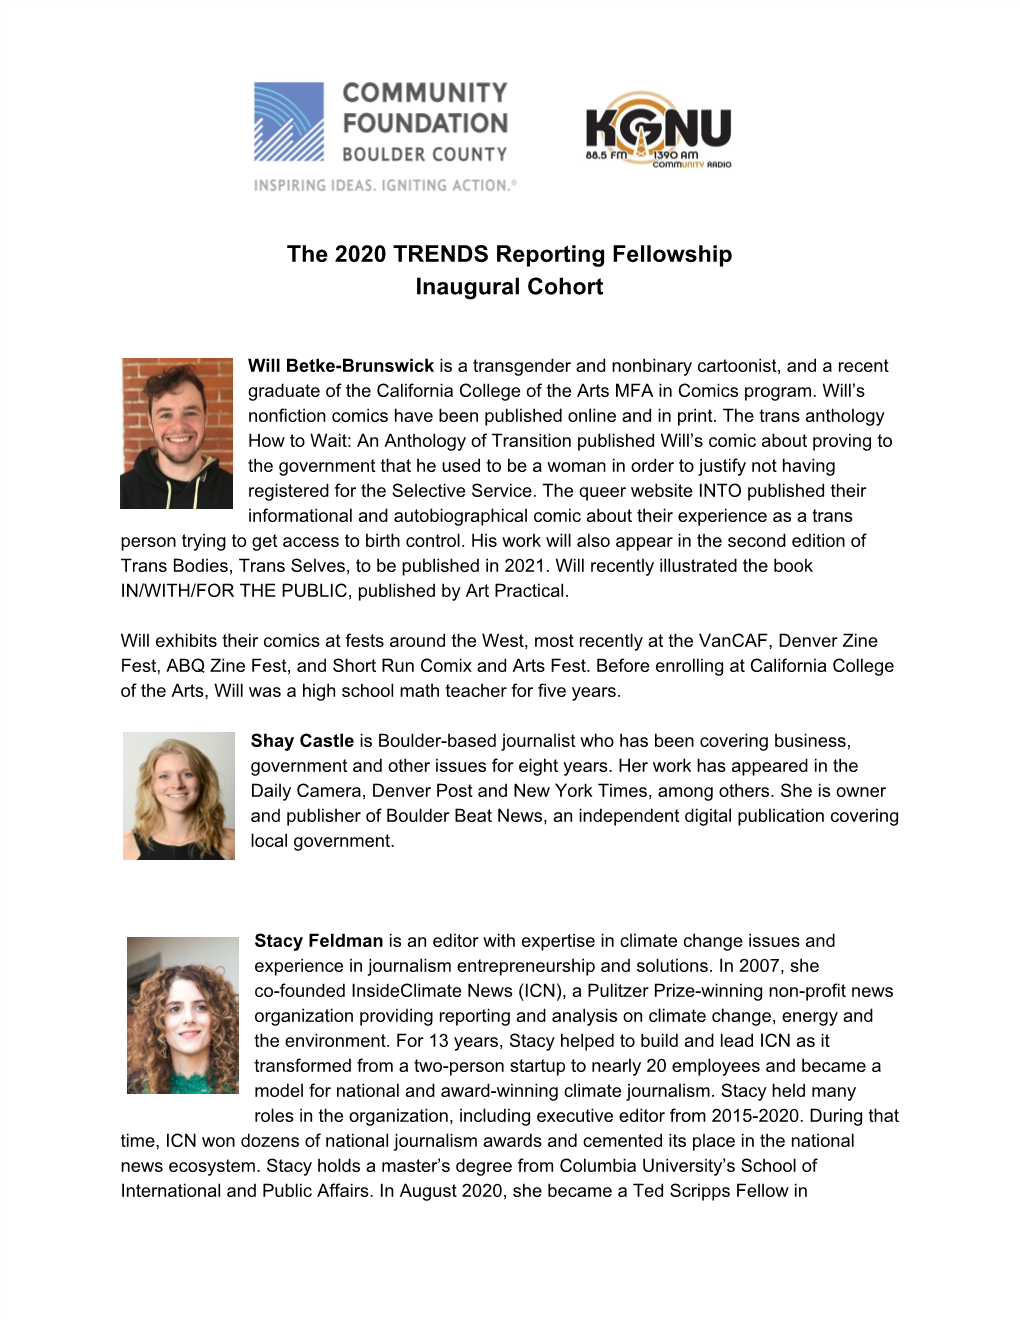 The 2020 TRENDS Reporting Fellowship Inaugural Cohort